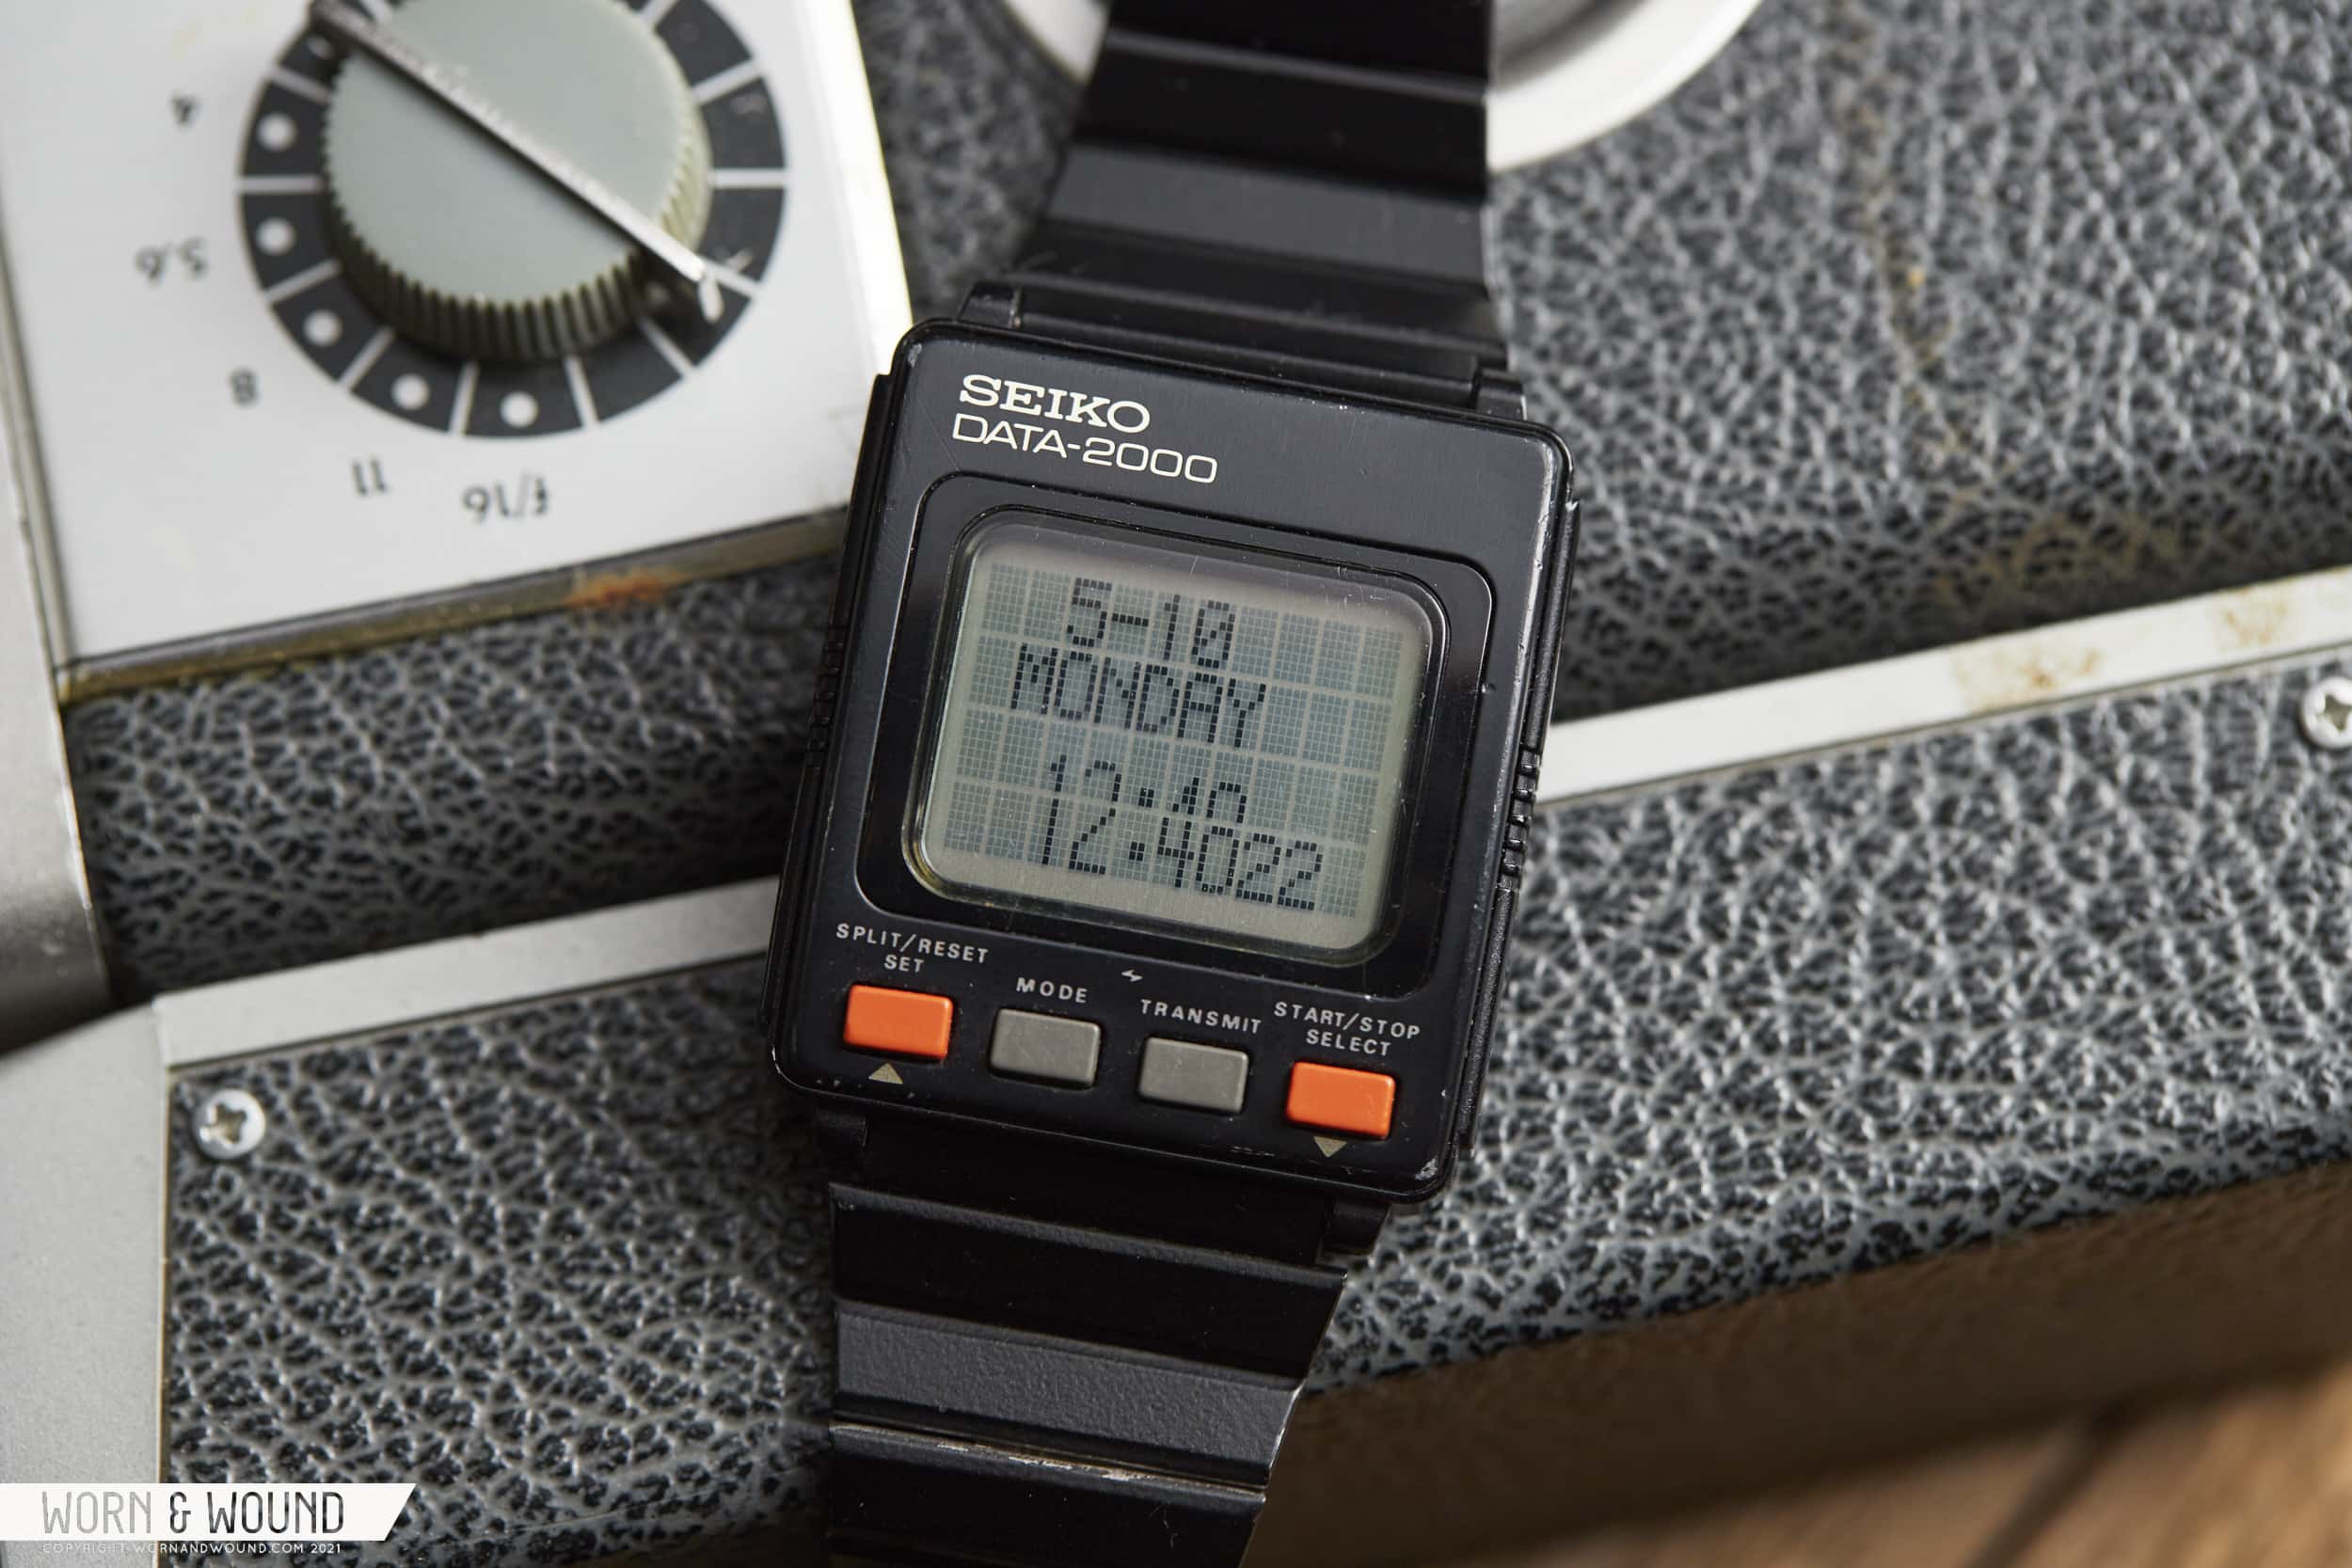 From Deep in the Watch Box: The Seiko Data 2000